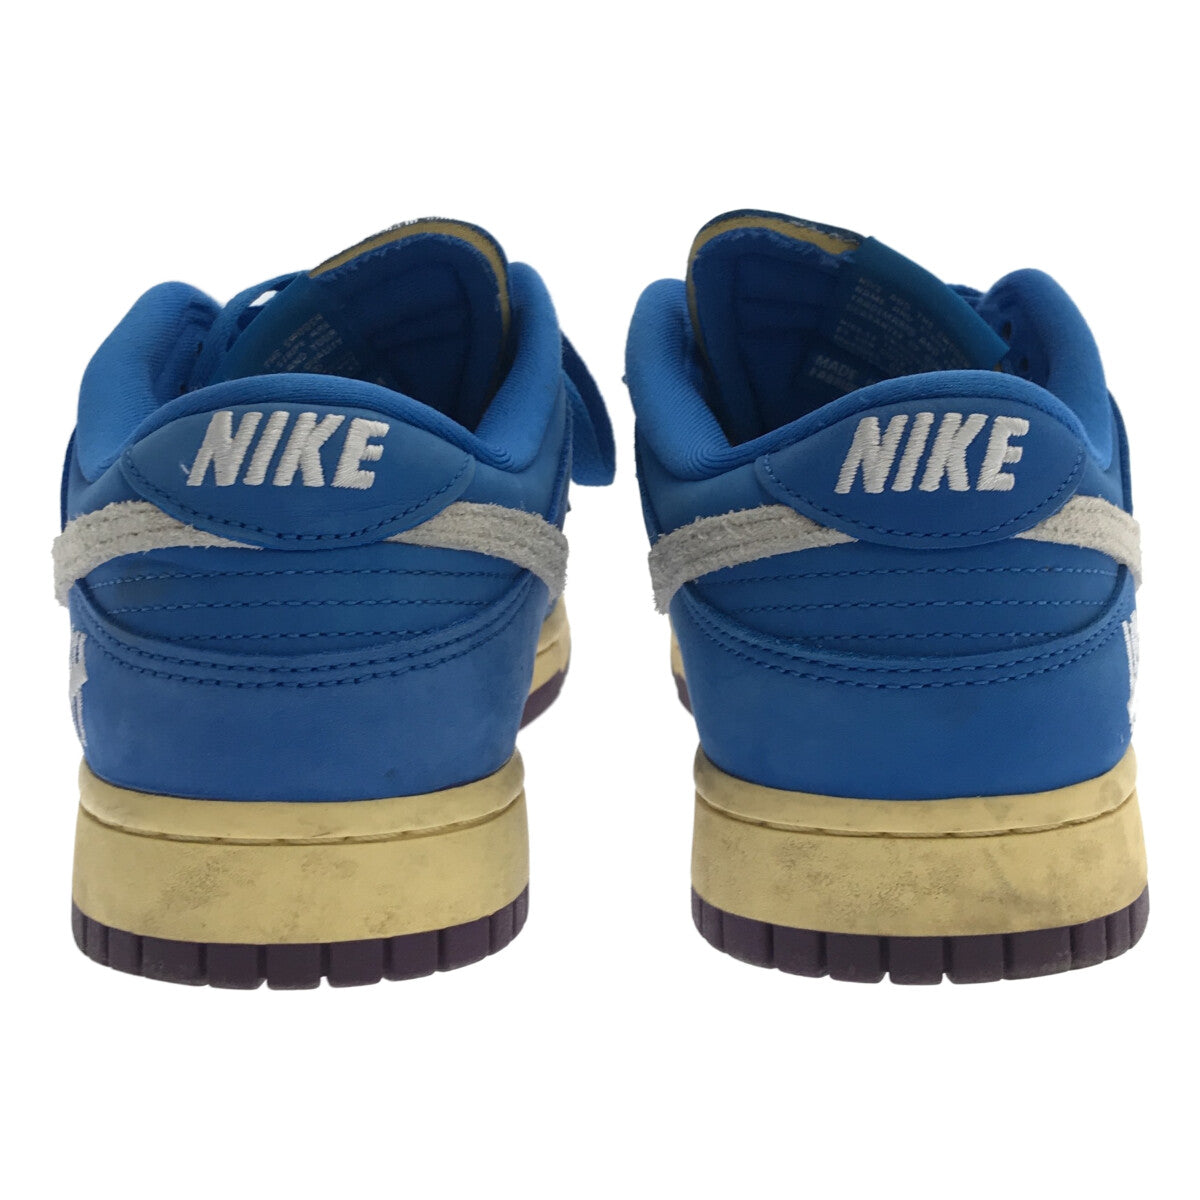 NIKE / ナイキ | × UNDEFEATED DUNK LOW SP ダンク ロー スニーカー 